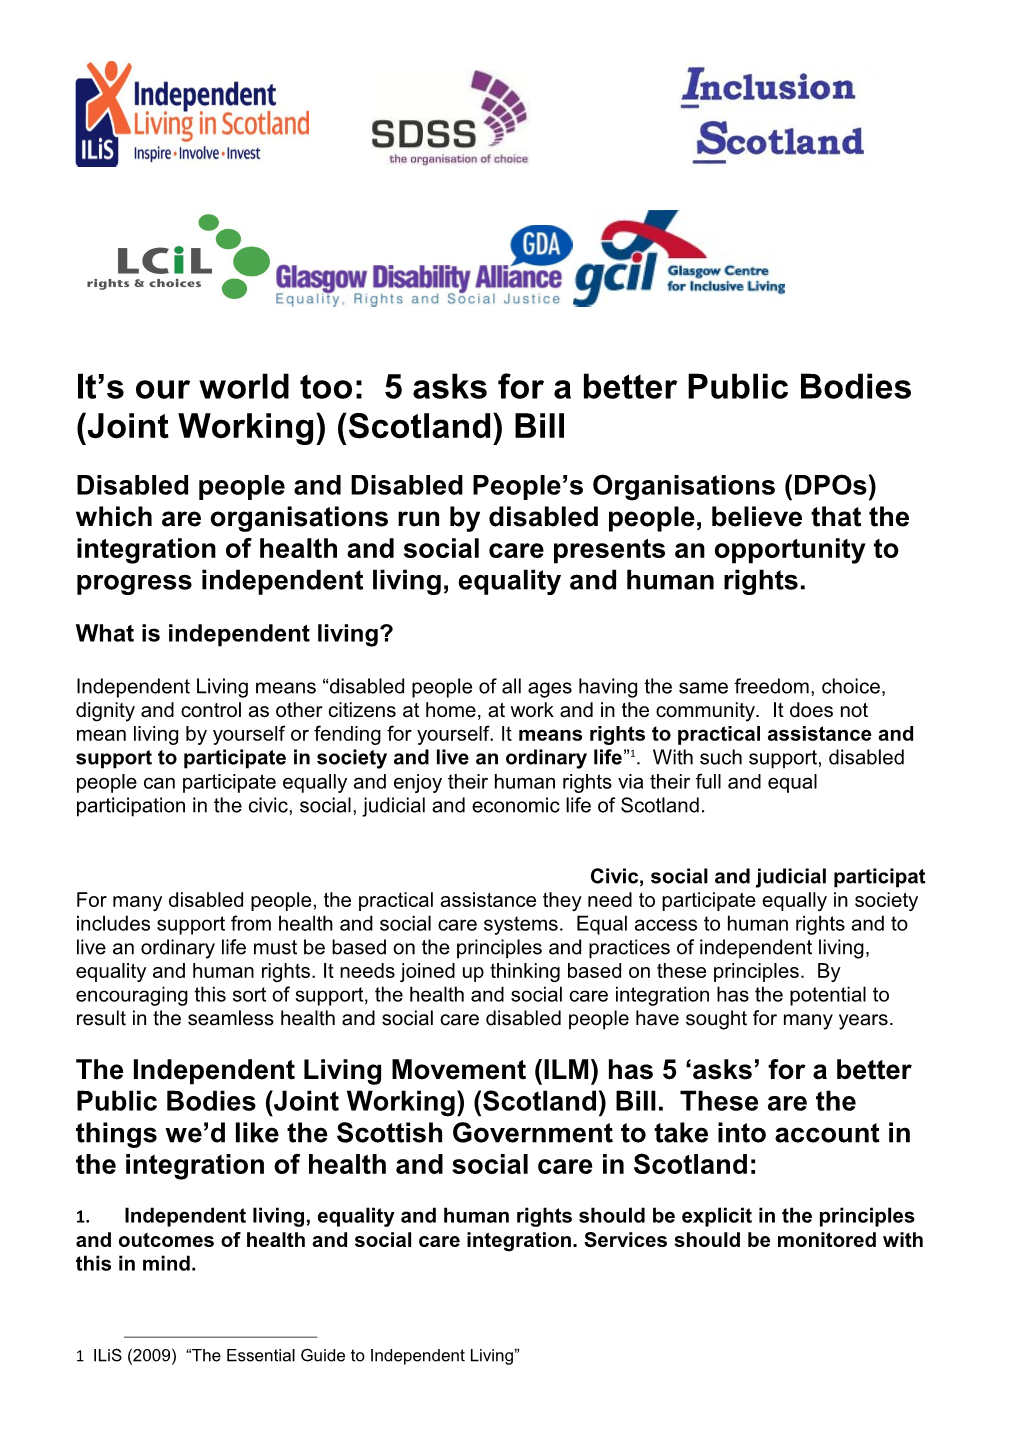 It S Our World Too: 5 Asks for a Better Public Bodies (Joint Working) (Scotland) Bill